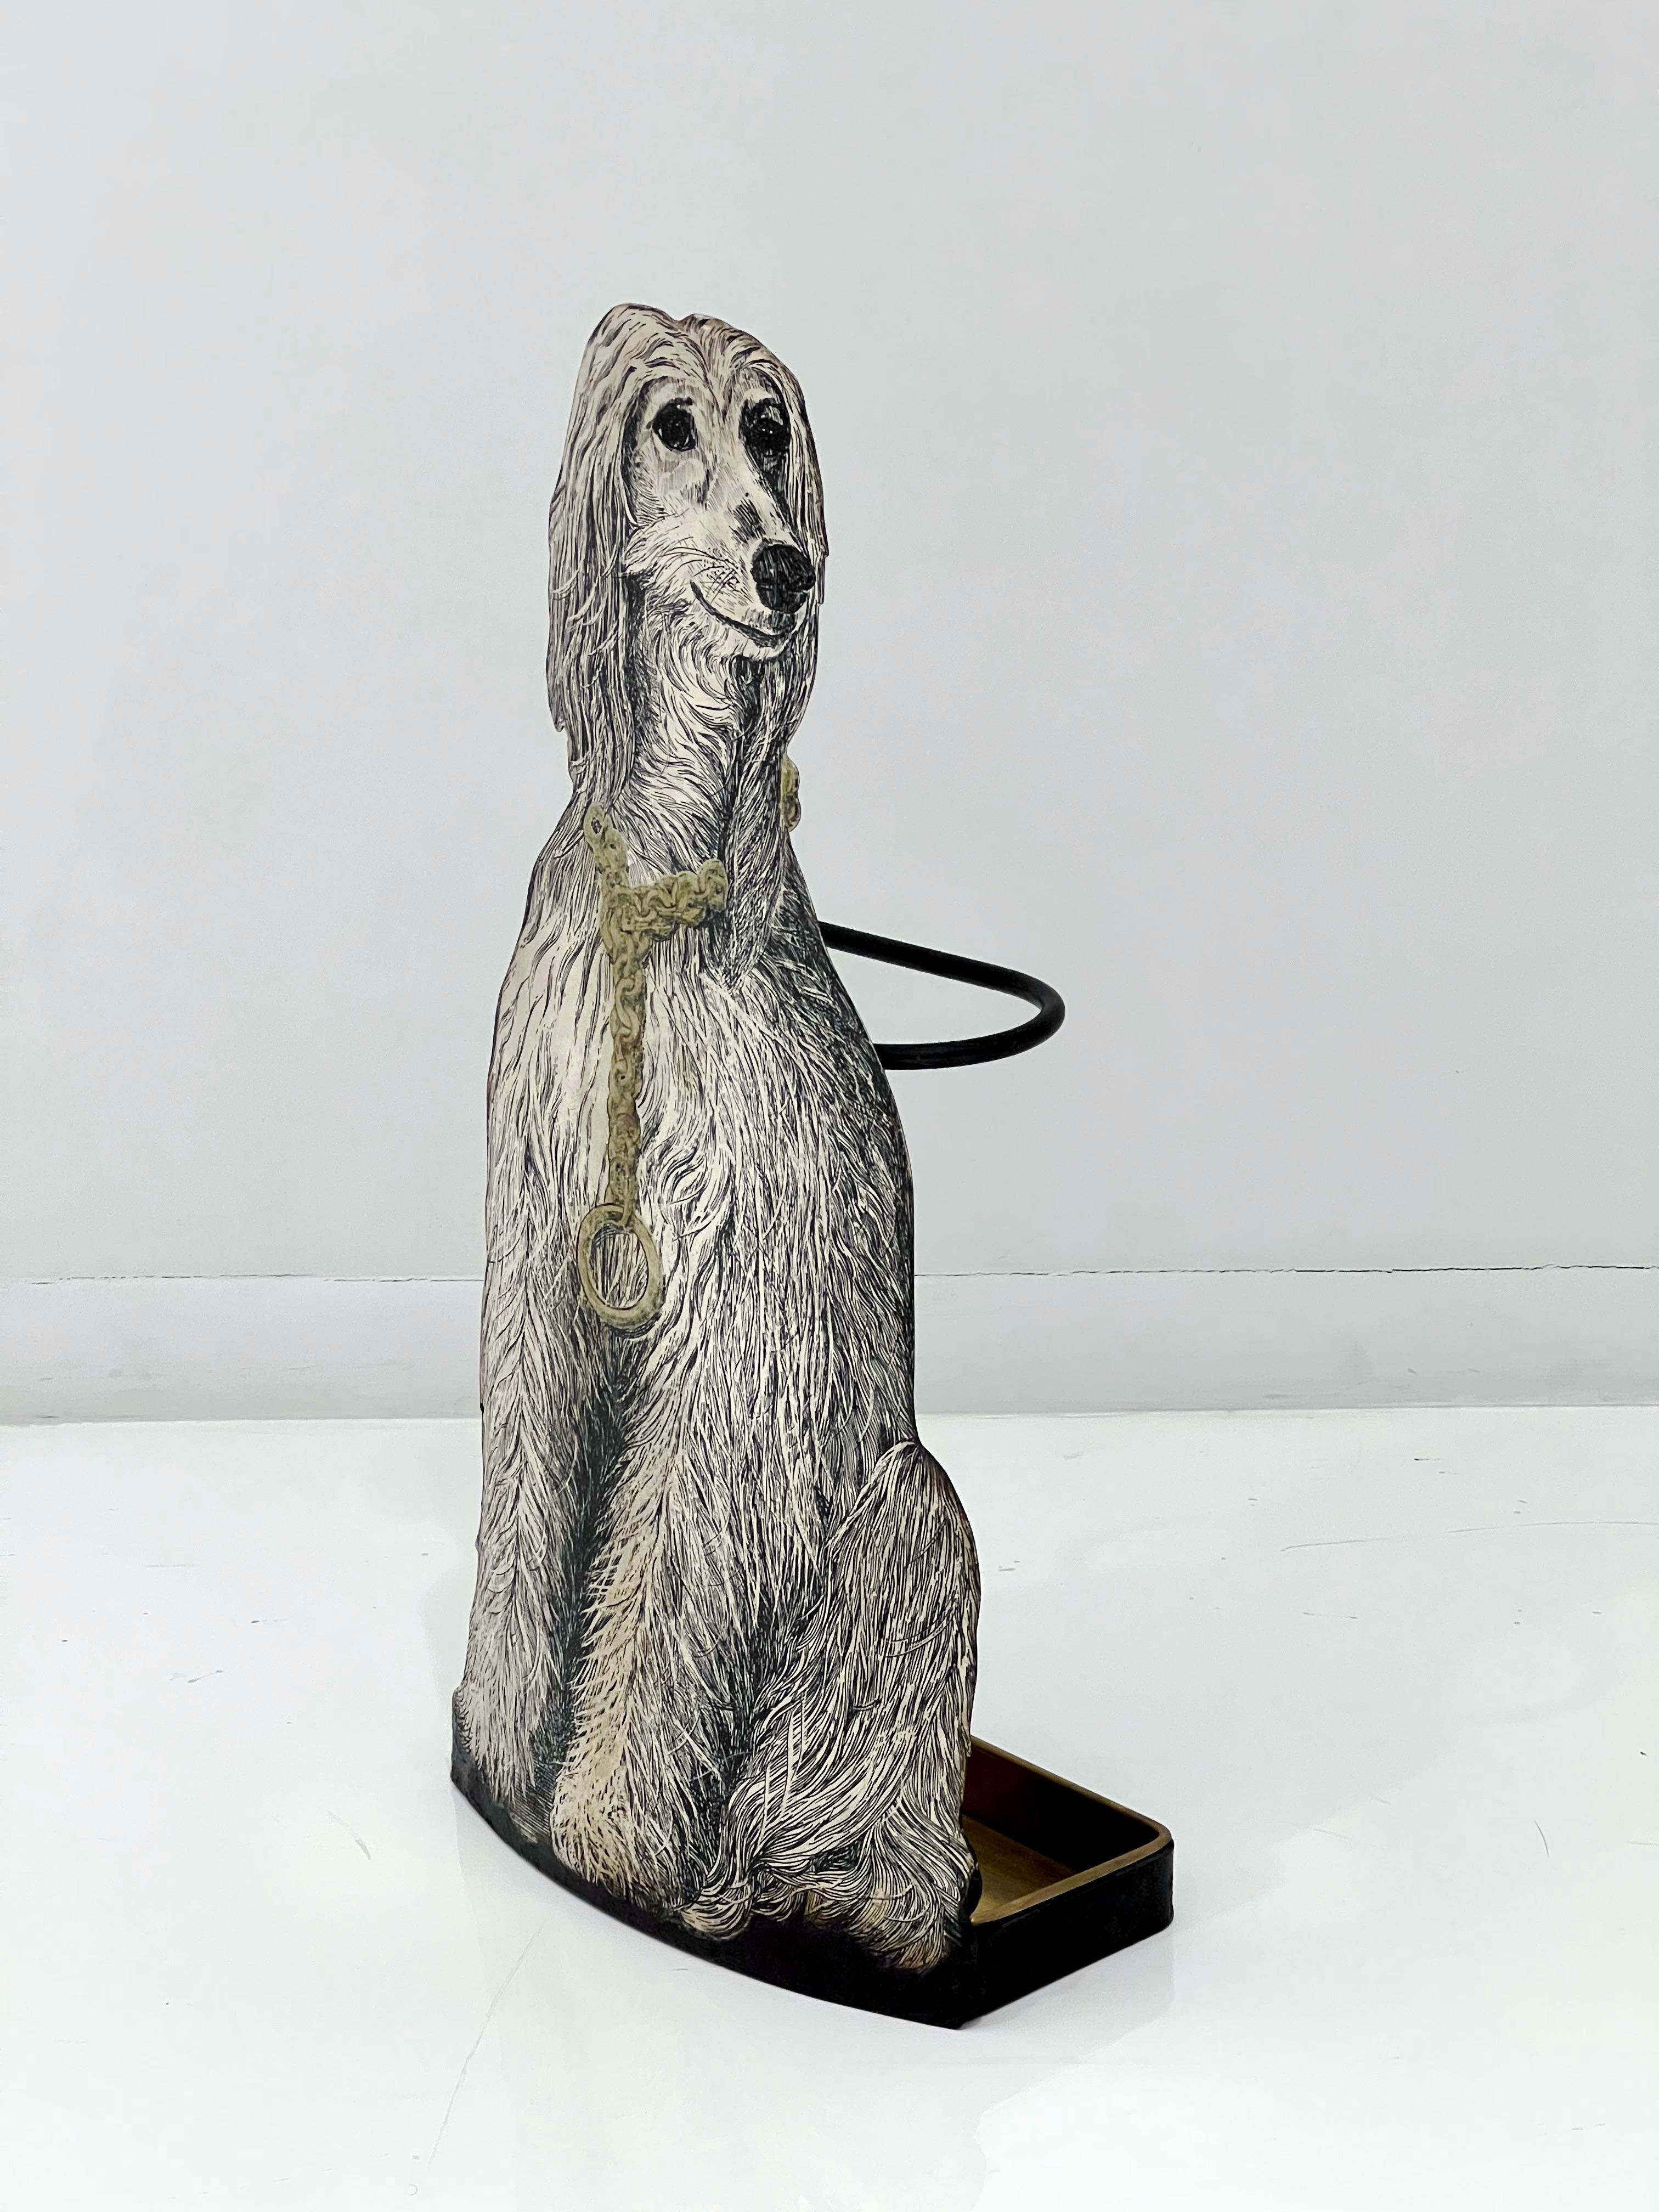 Mid-Century Modern Piero Fornasetti 'Afghan Hound' Umbrella Stand For Sale